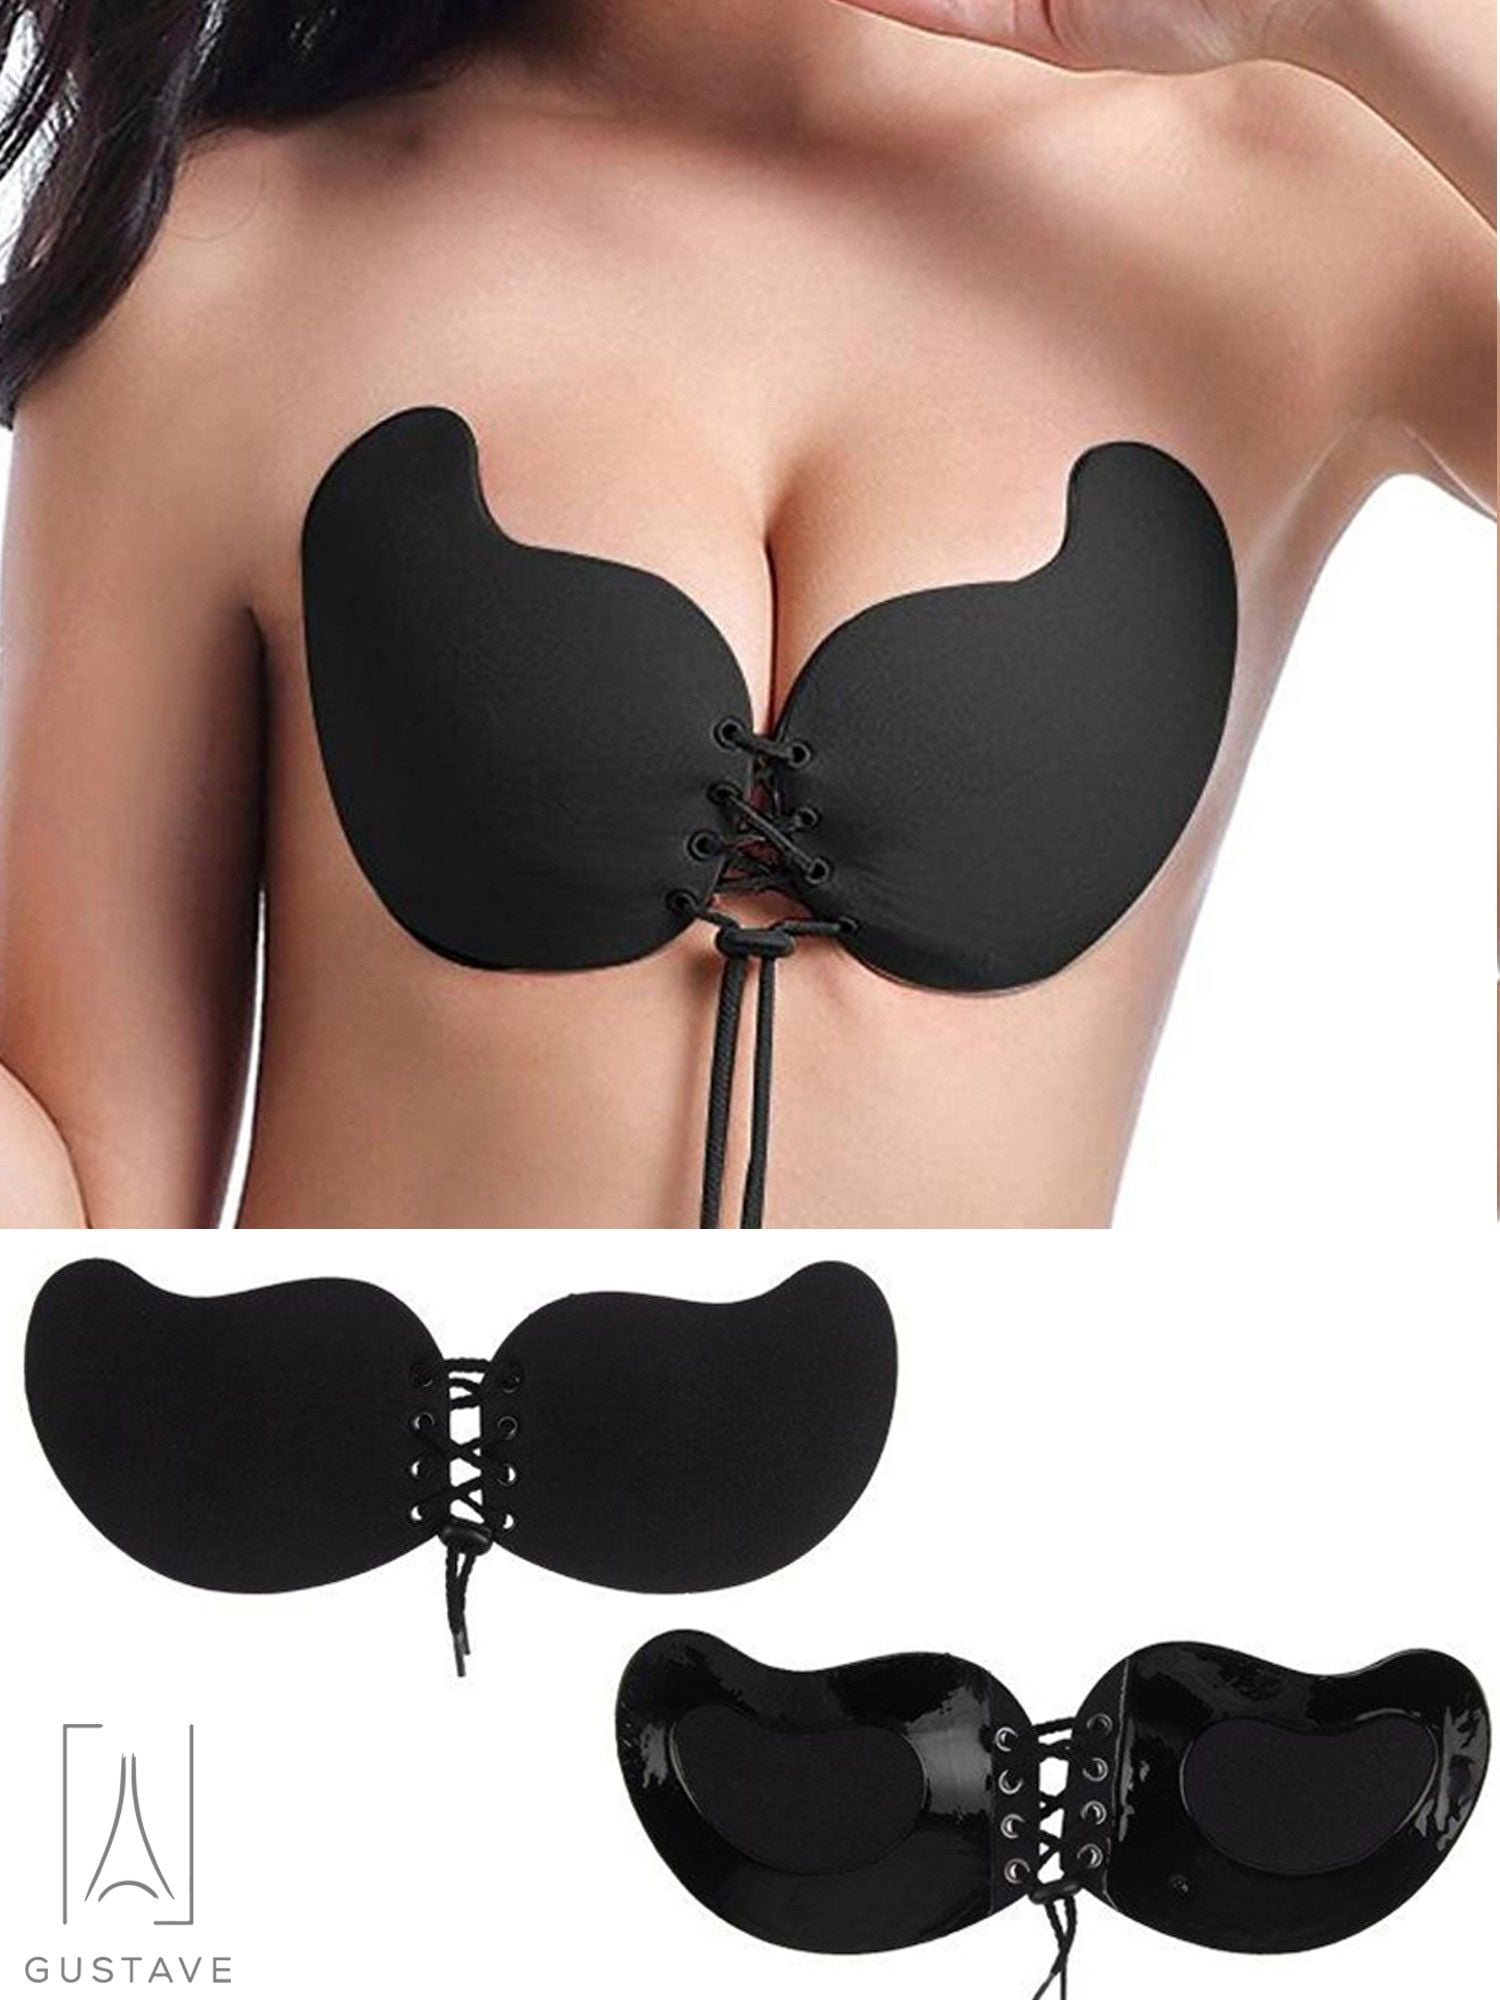 Women Invisible Bras Sexy Push Up Bras Backless Strapless Adhesive Stick Bra  Lingerie Grils Seamless Silicone Bralette Underwear - AliExpress